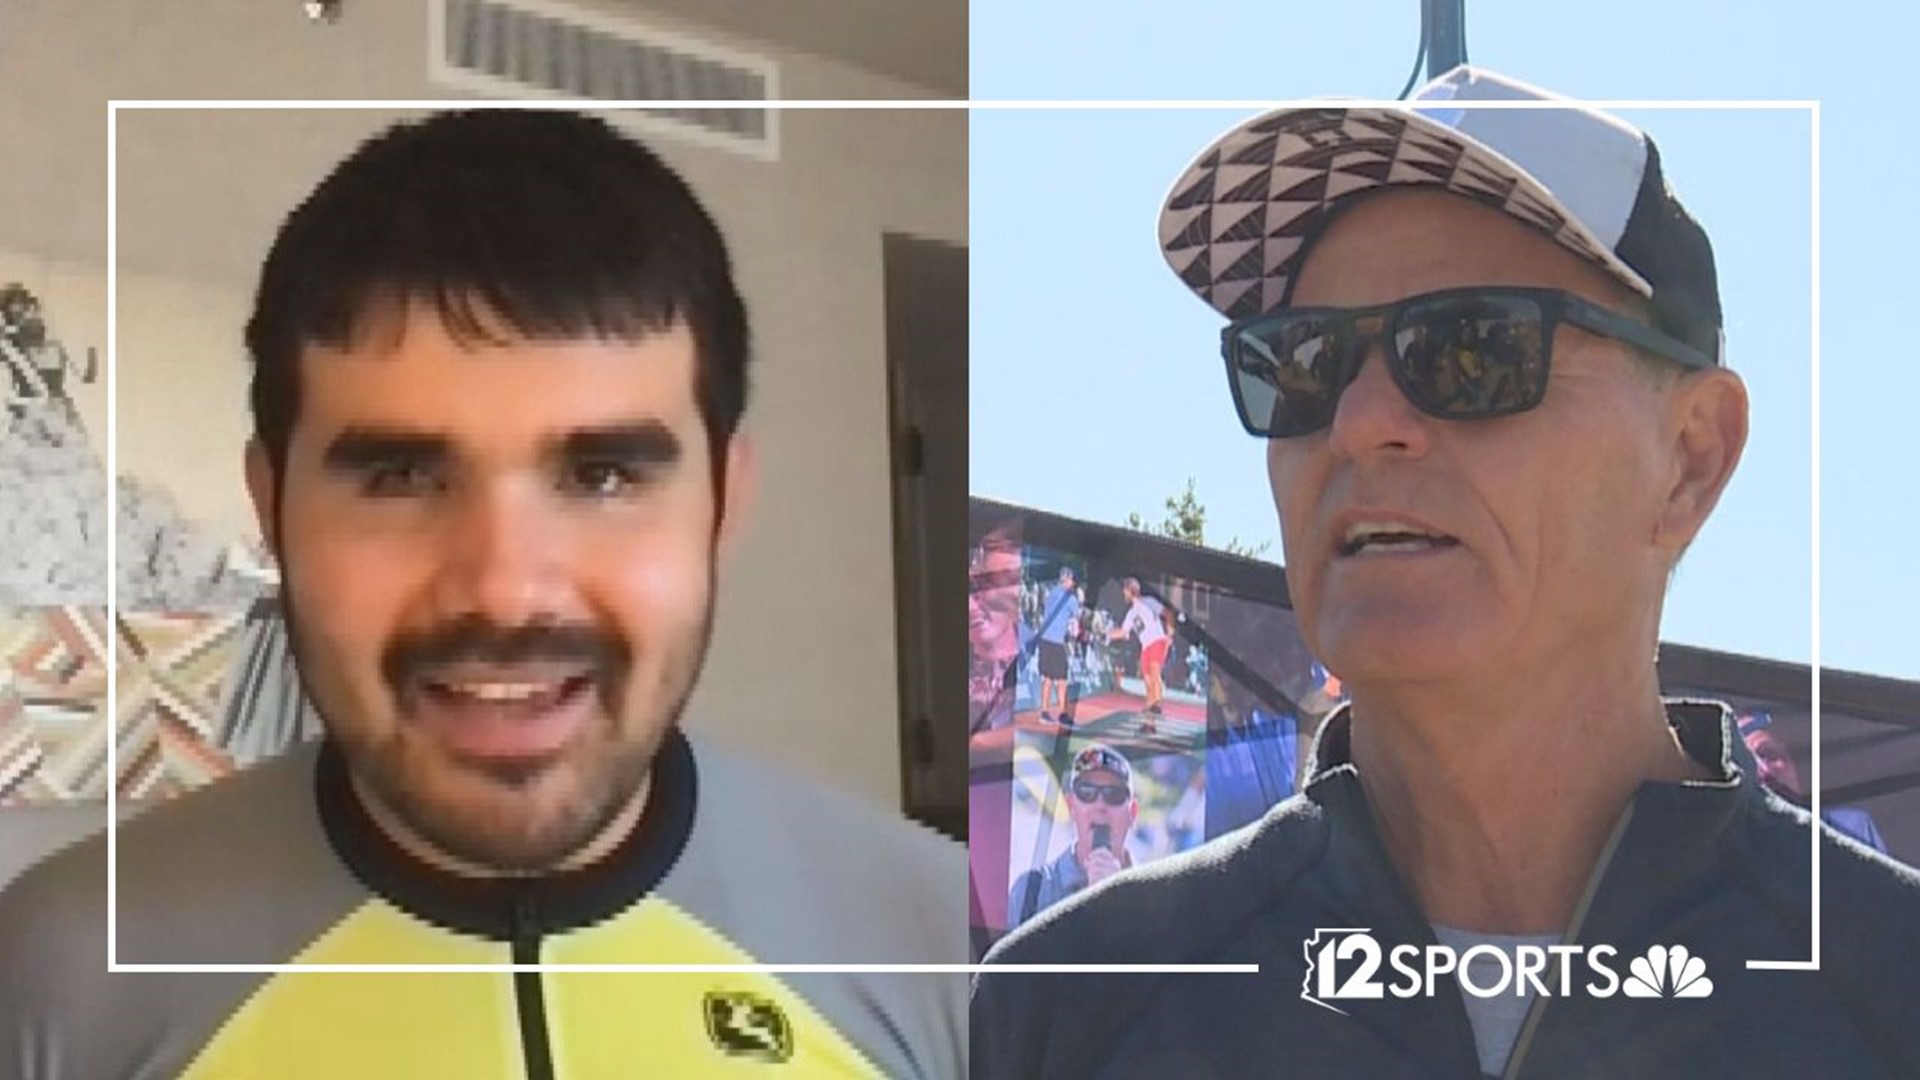 This year's Ironman Arizona has some great stories, including a blind athlete turning disability into possibility and saying goodbye to the "Voice of Ironman."